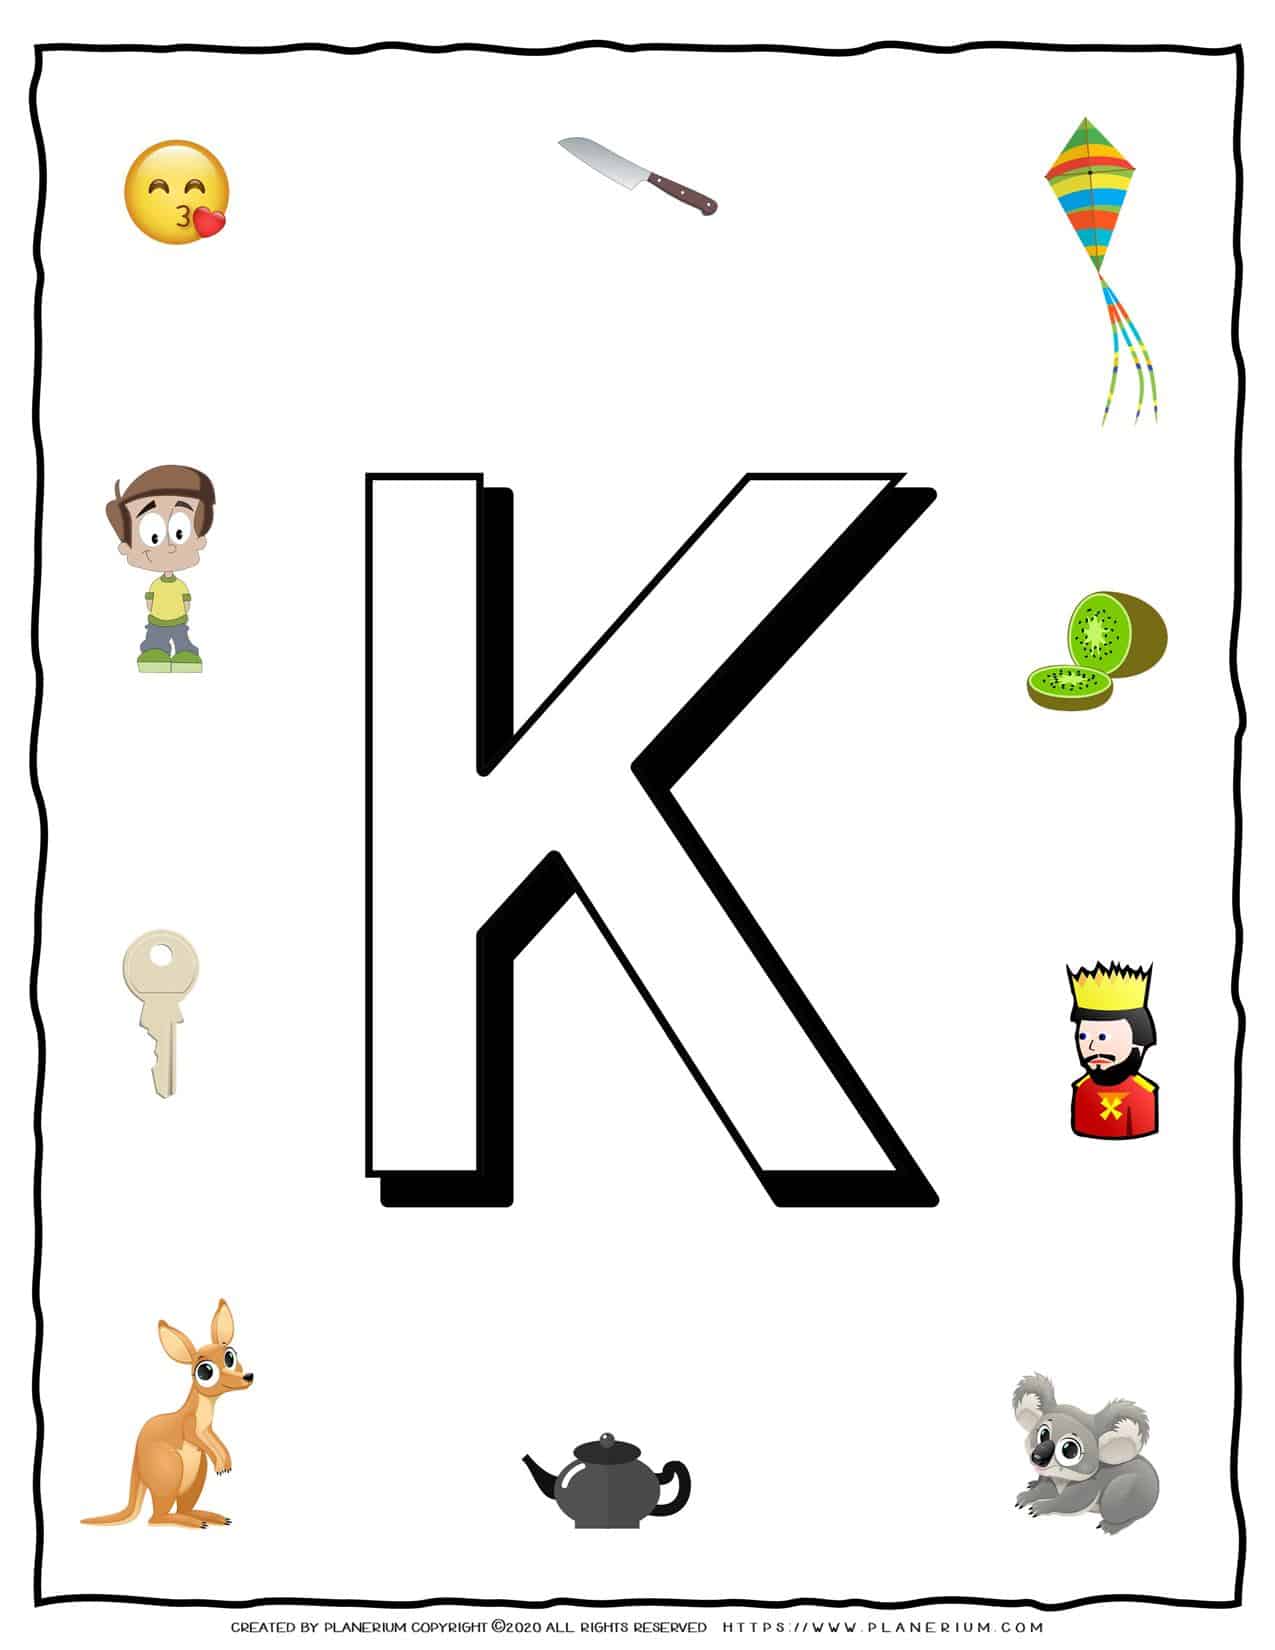 English Alphabet - Objects that starts with K | Planerium